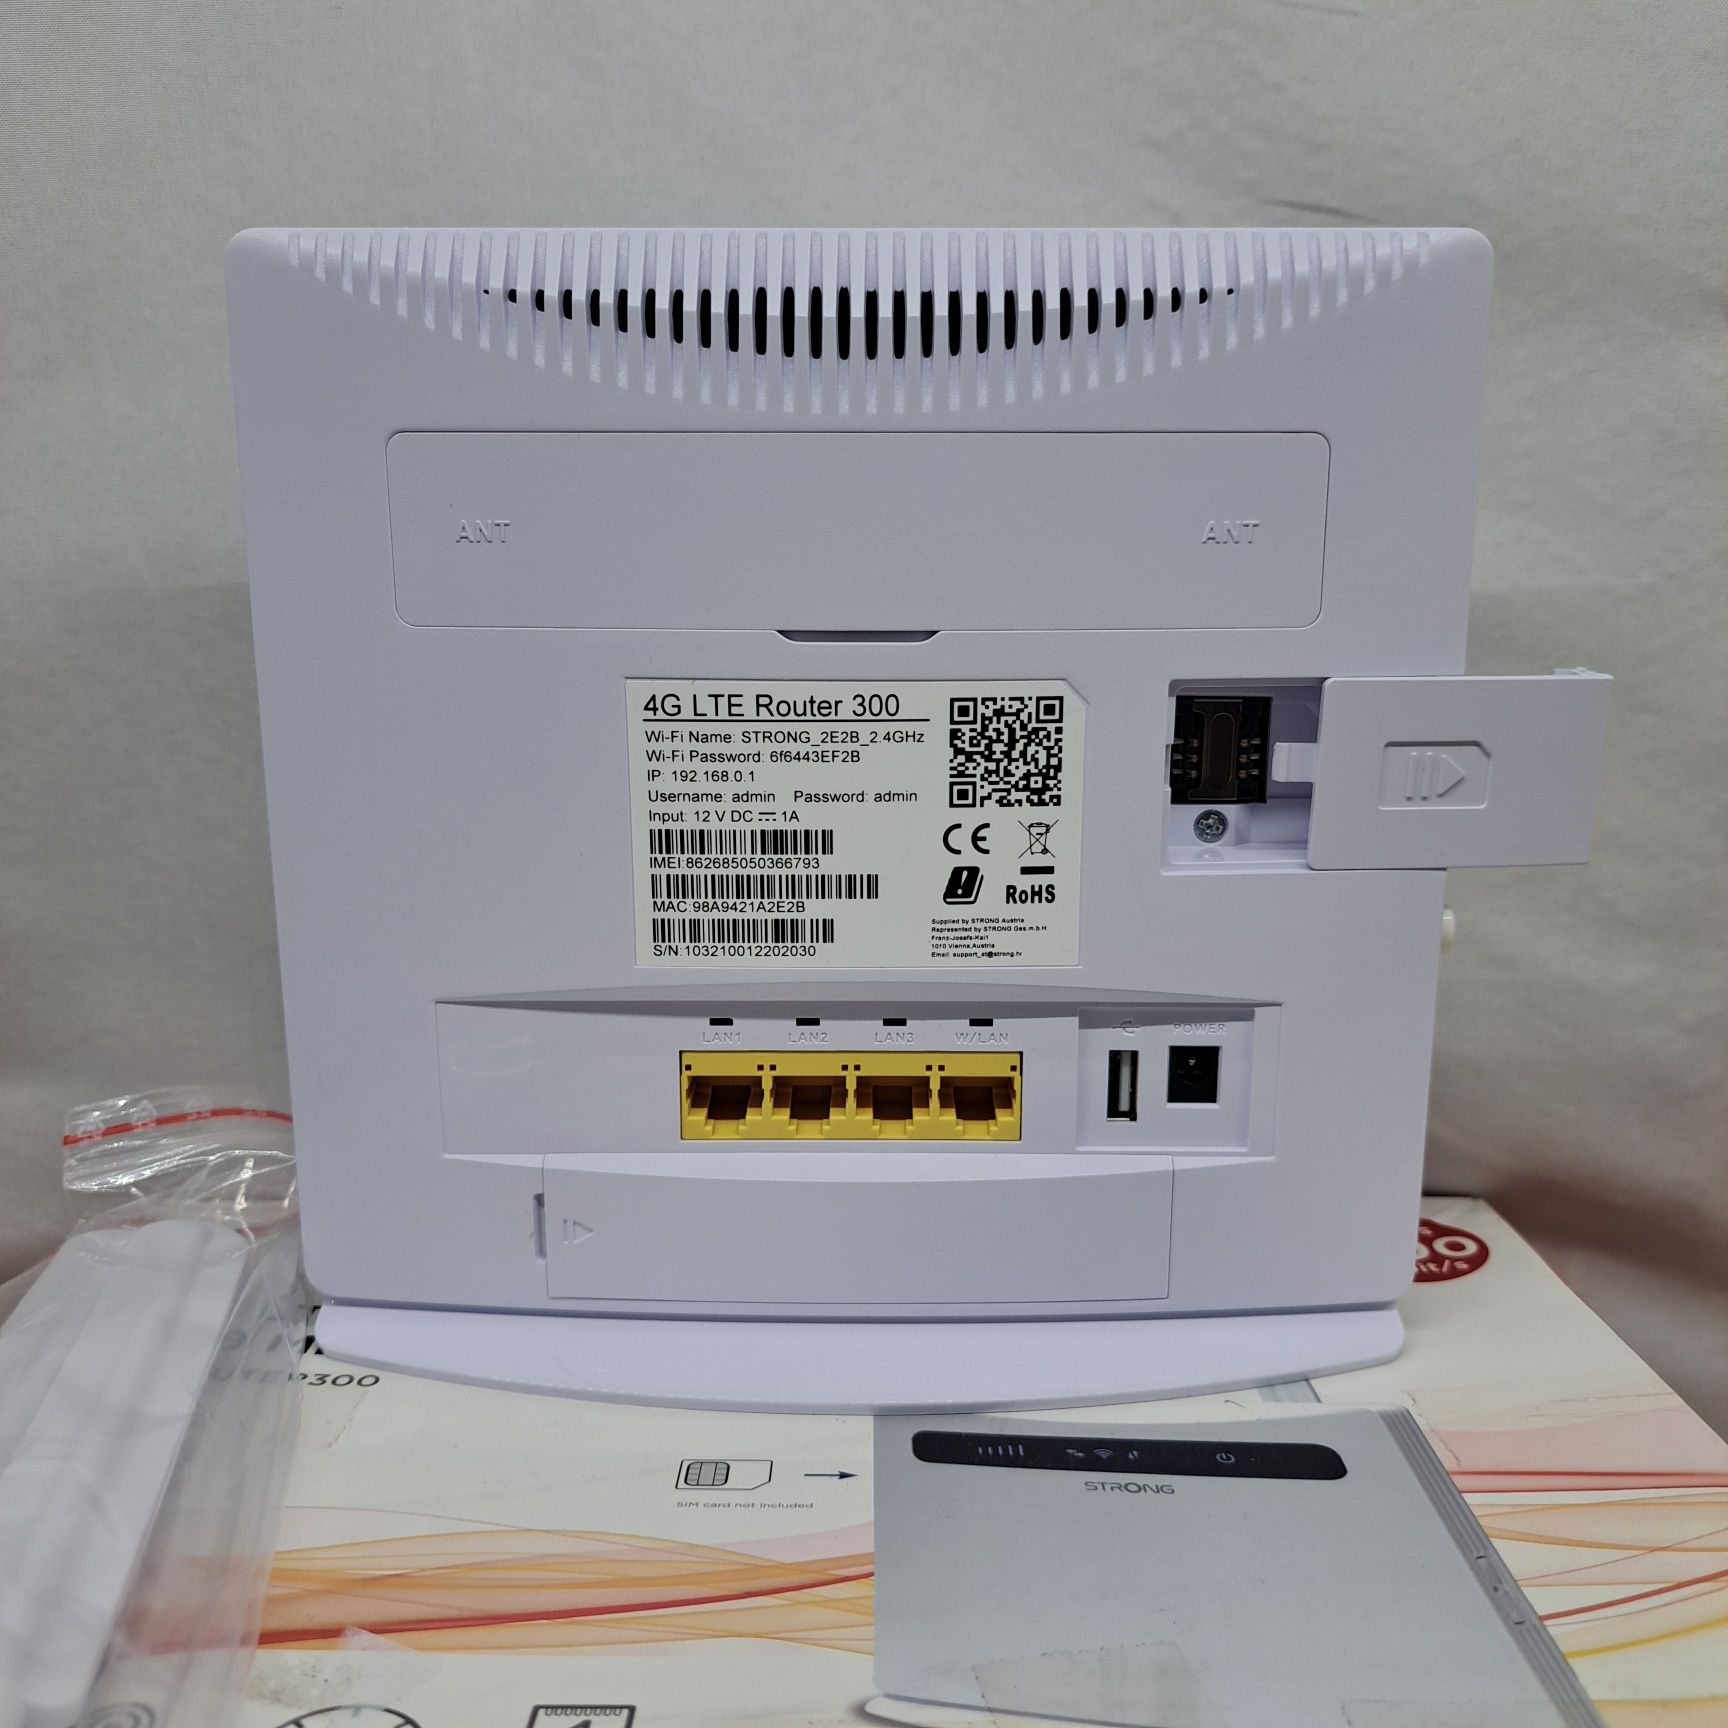 STRONG Router 4G LTE 300Mbit/s